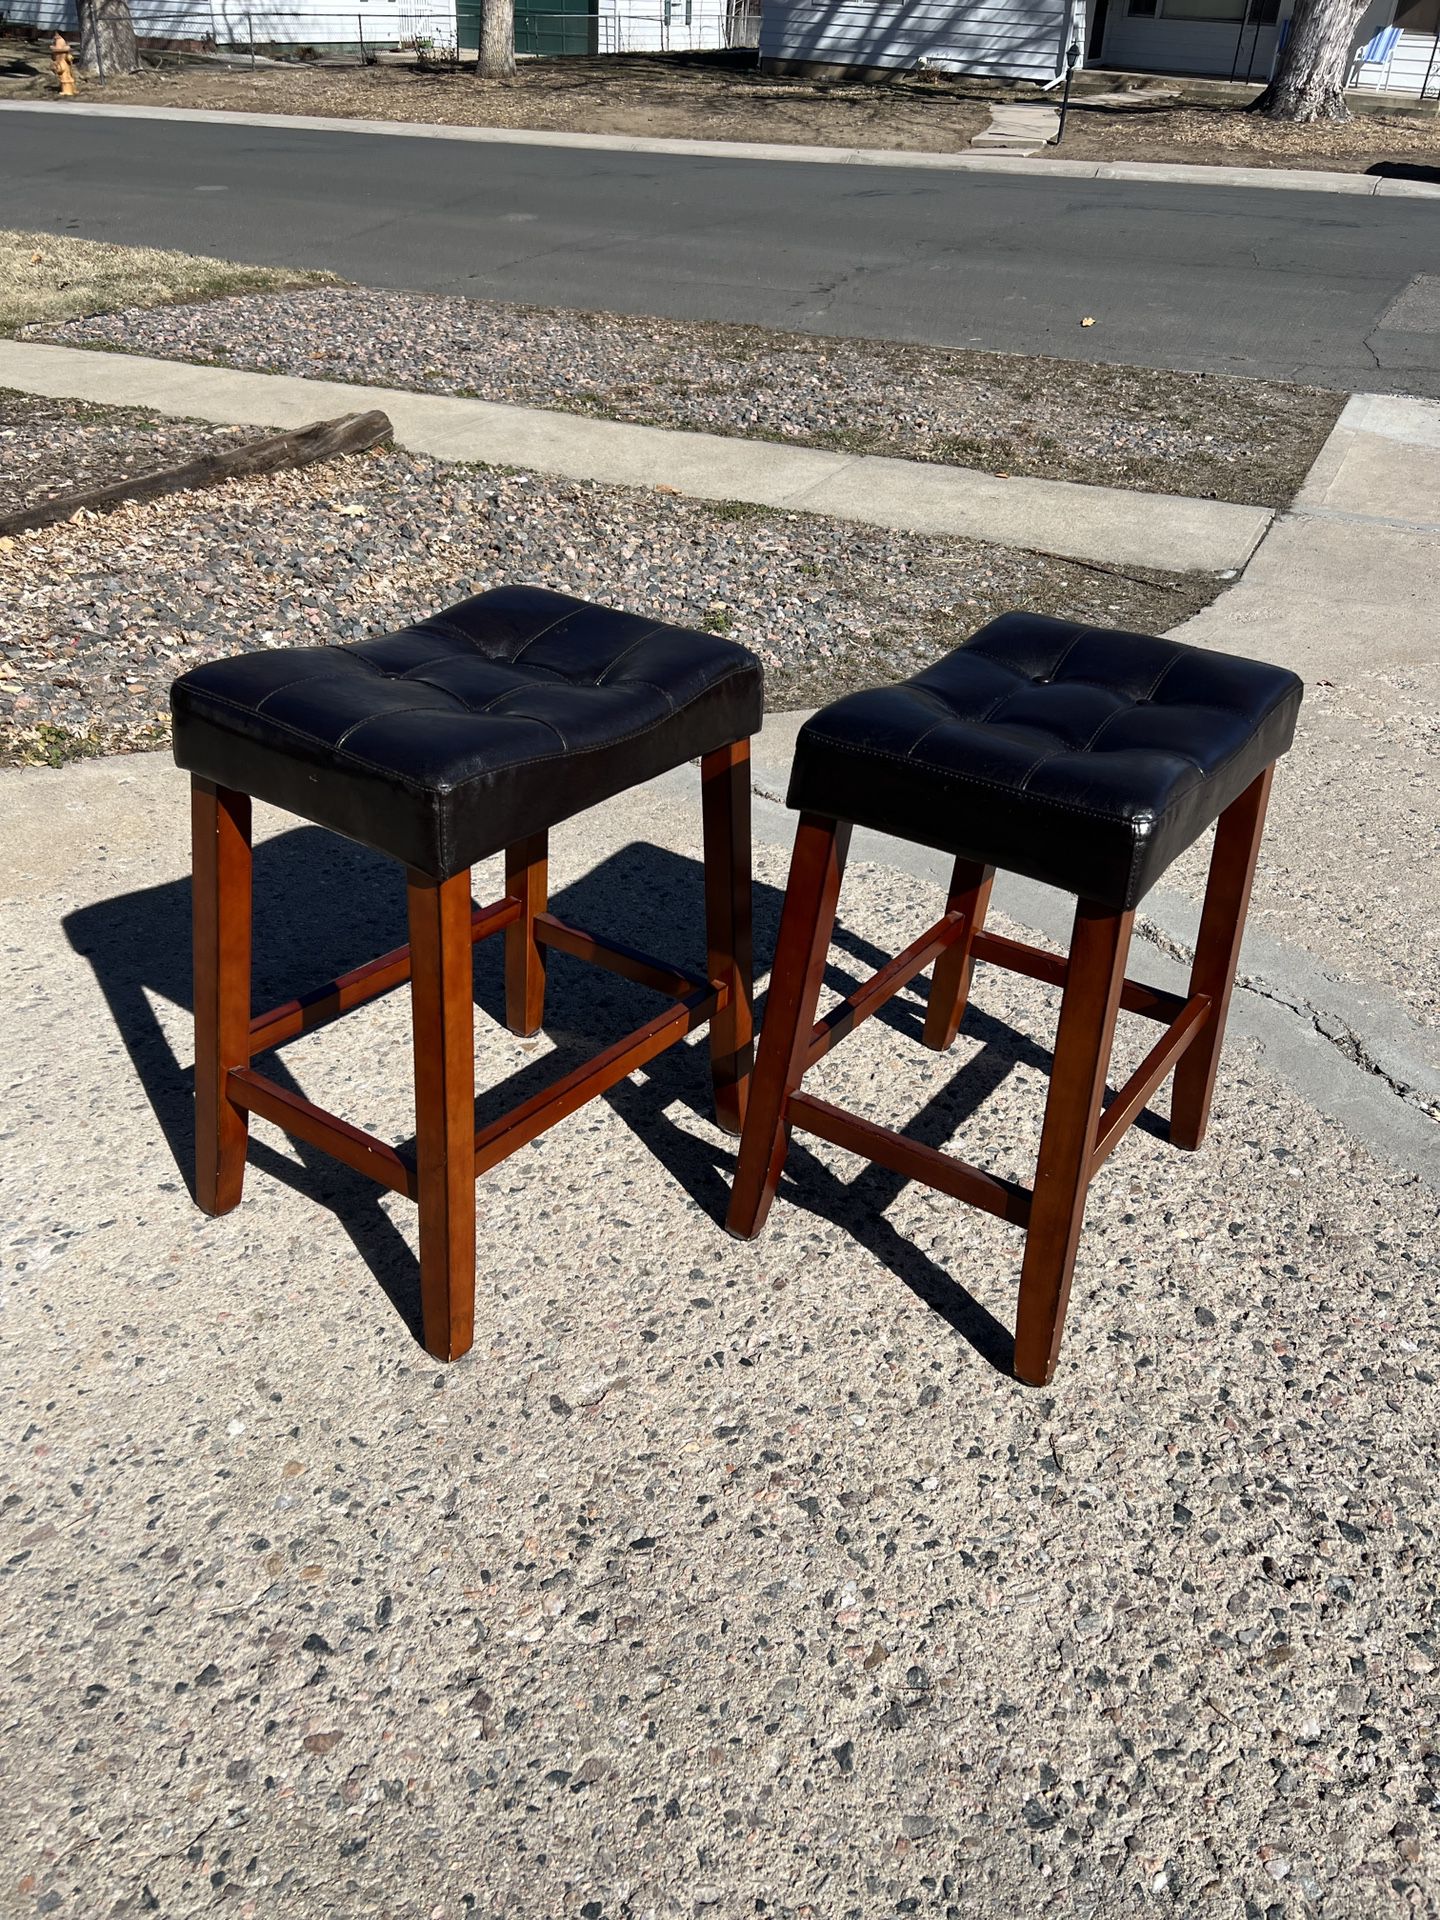 Two Comfy Stools